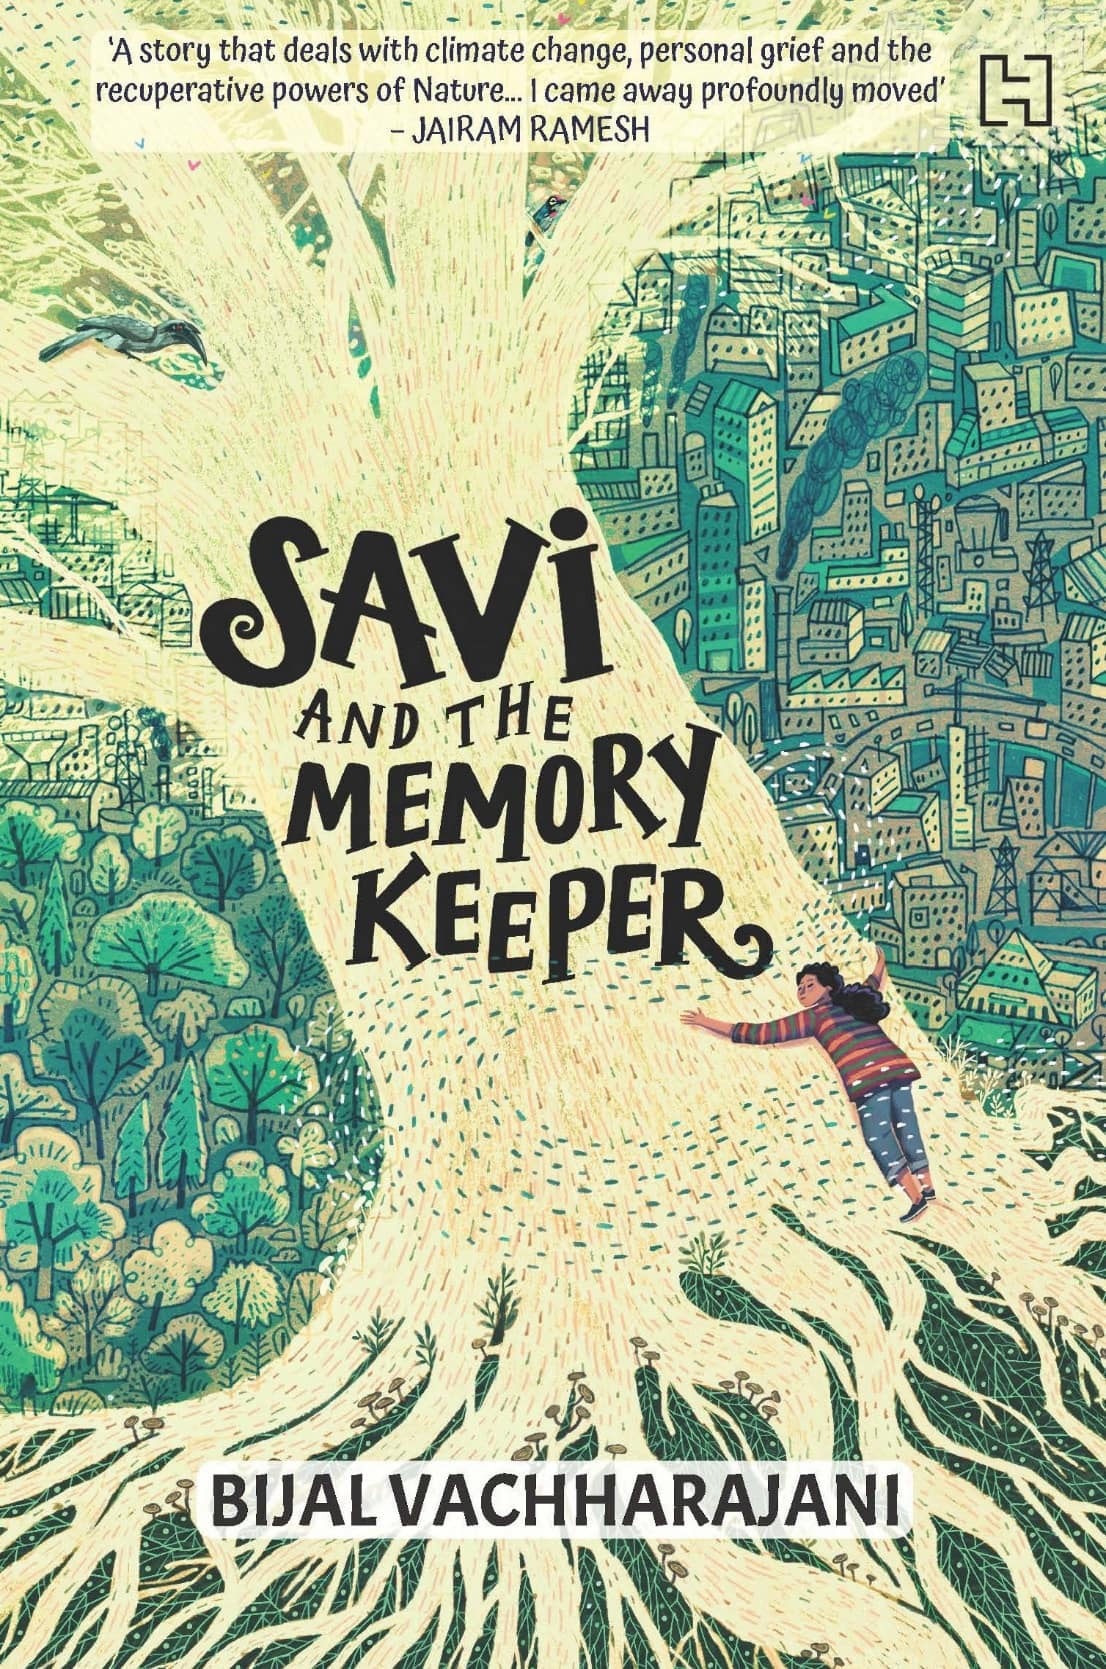 Cover for Savi and the Memory Keeper featuring an illustration of the silhouette of a large pale yellow tree with spindly roots over top a green landscape of foliage to the left and a city to the right with a girl hugging it's trunk. The book's title is displayed in black on top of the tree.